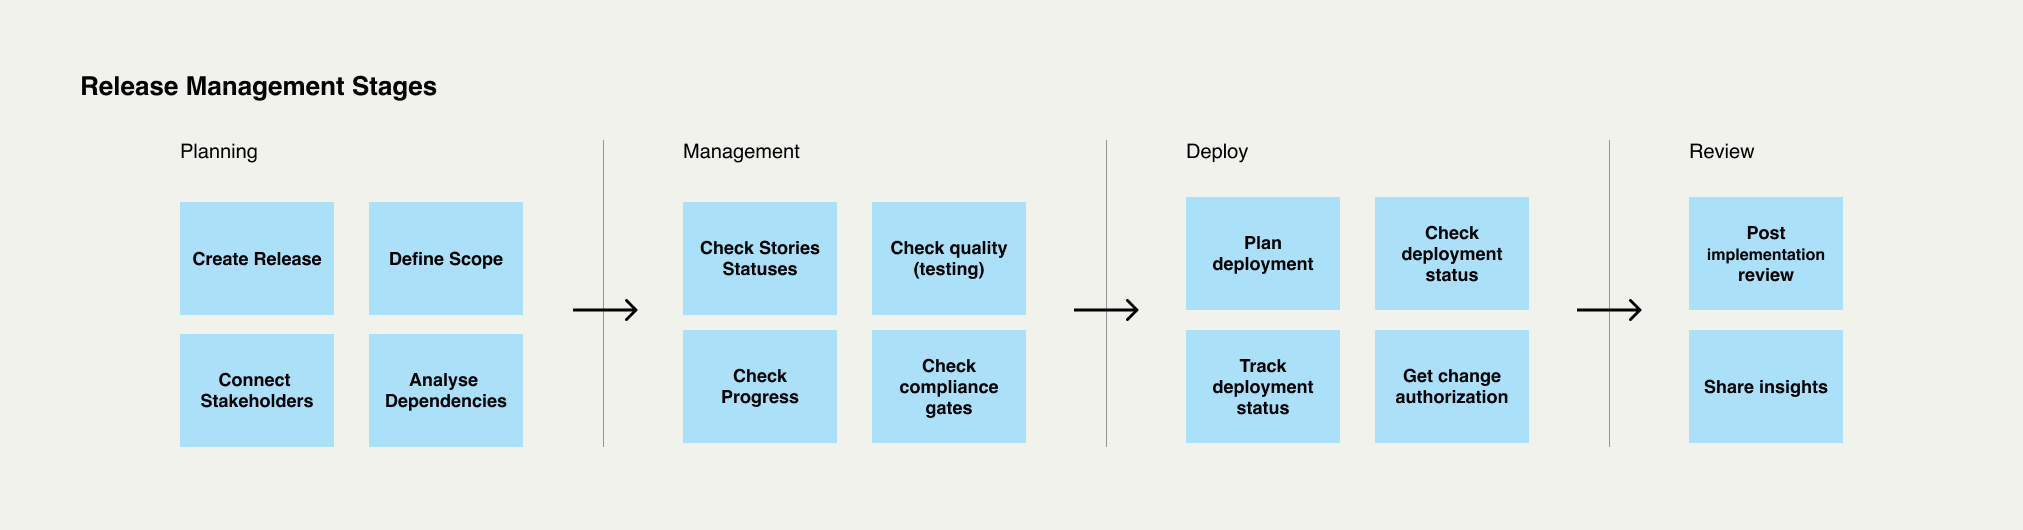 Release Management Stages